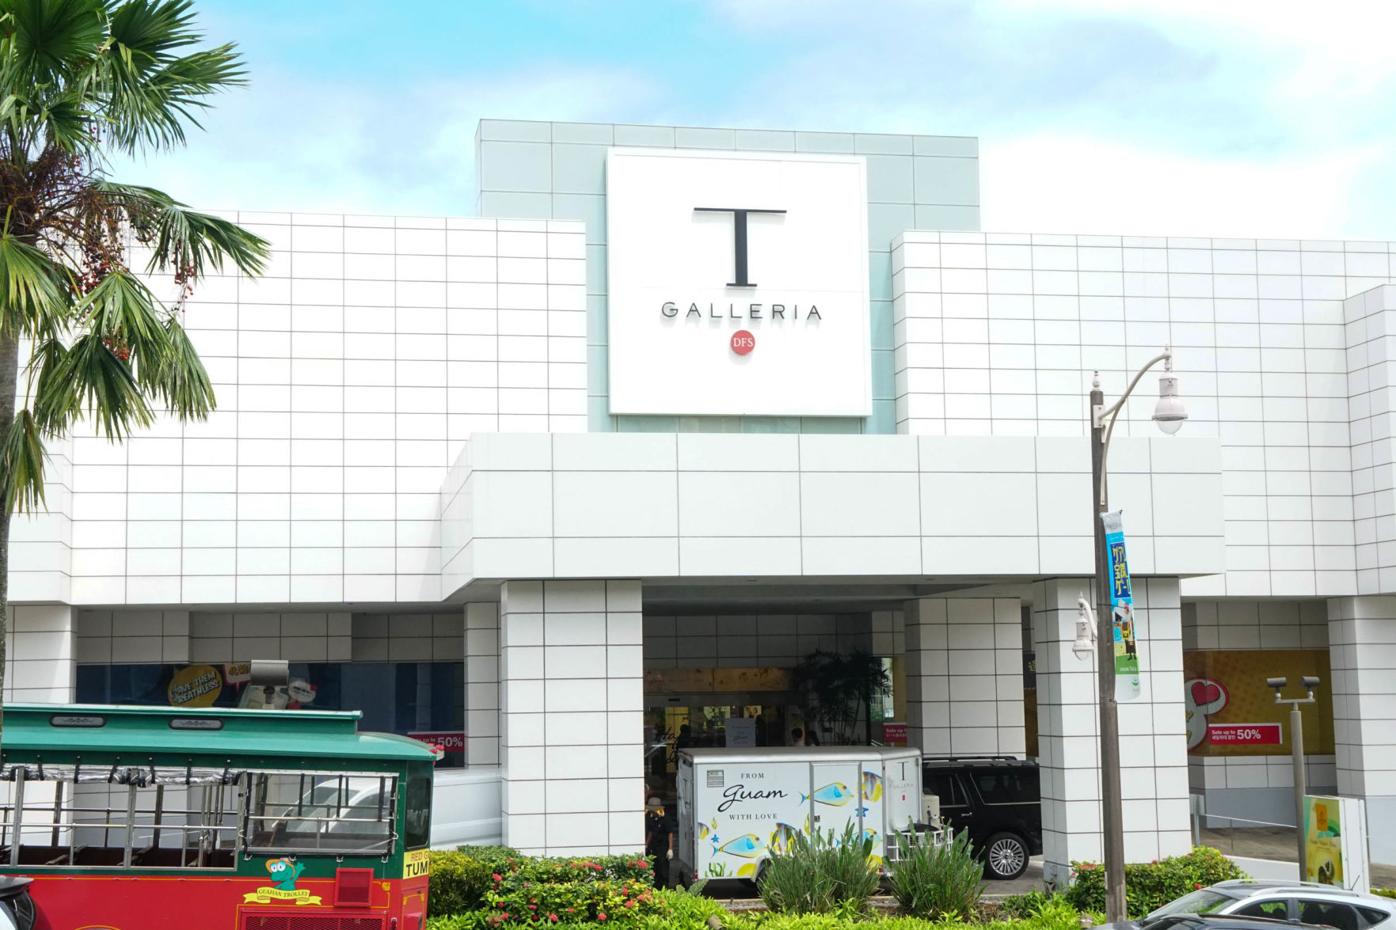 DFS - T Galleria by DFS Guam launches its first ever